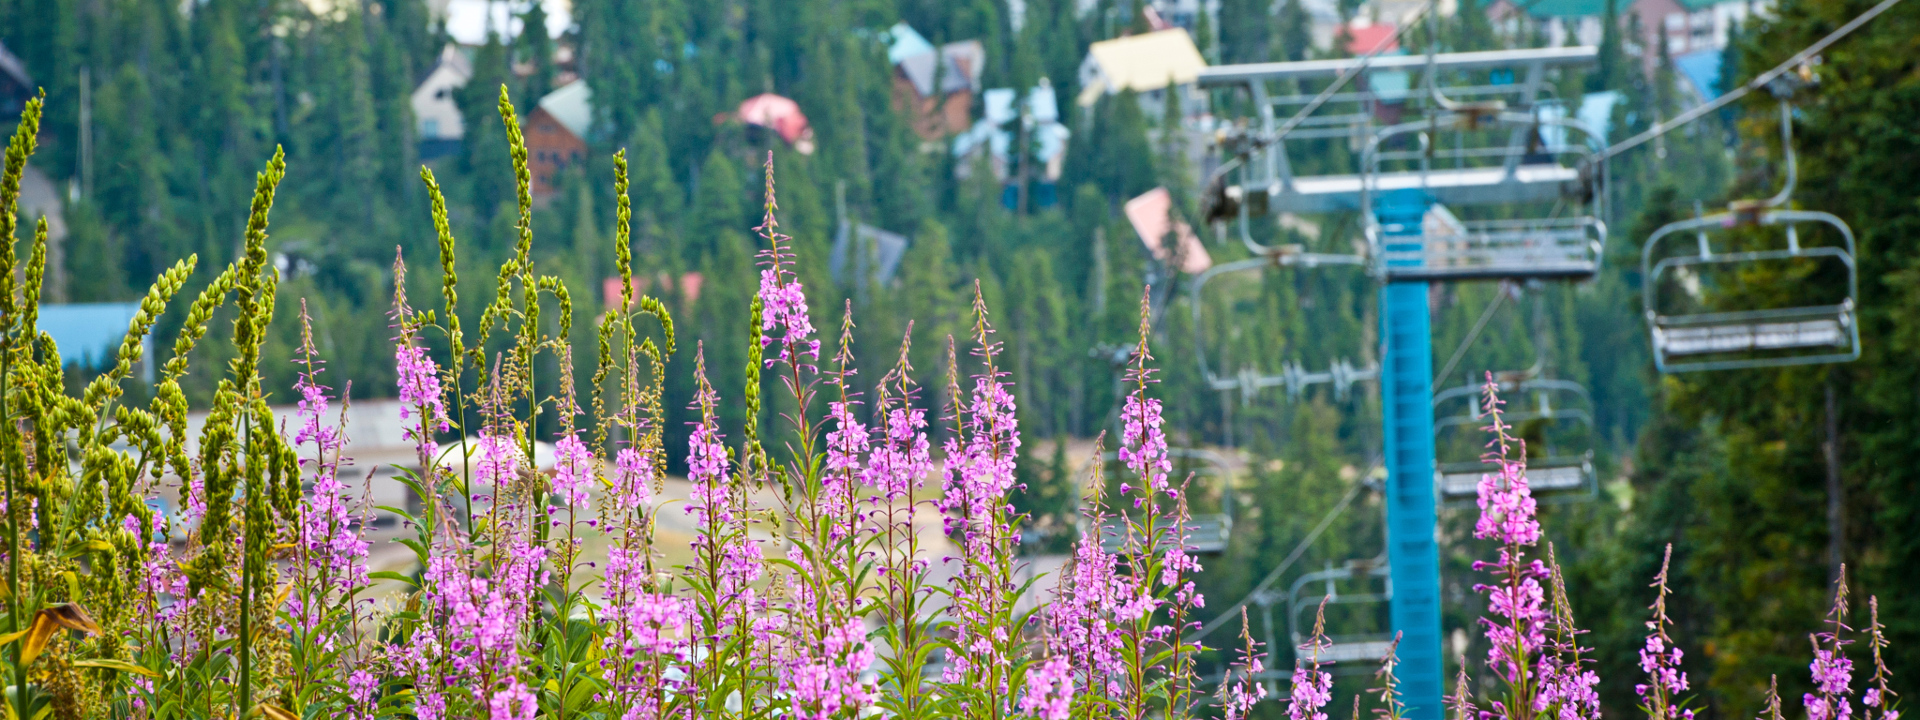 pink flowers with blue chairlift in the background